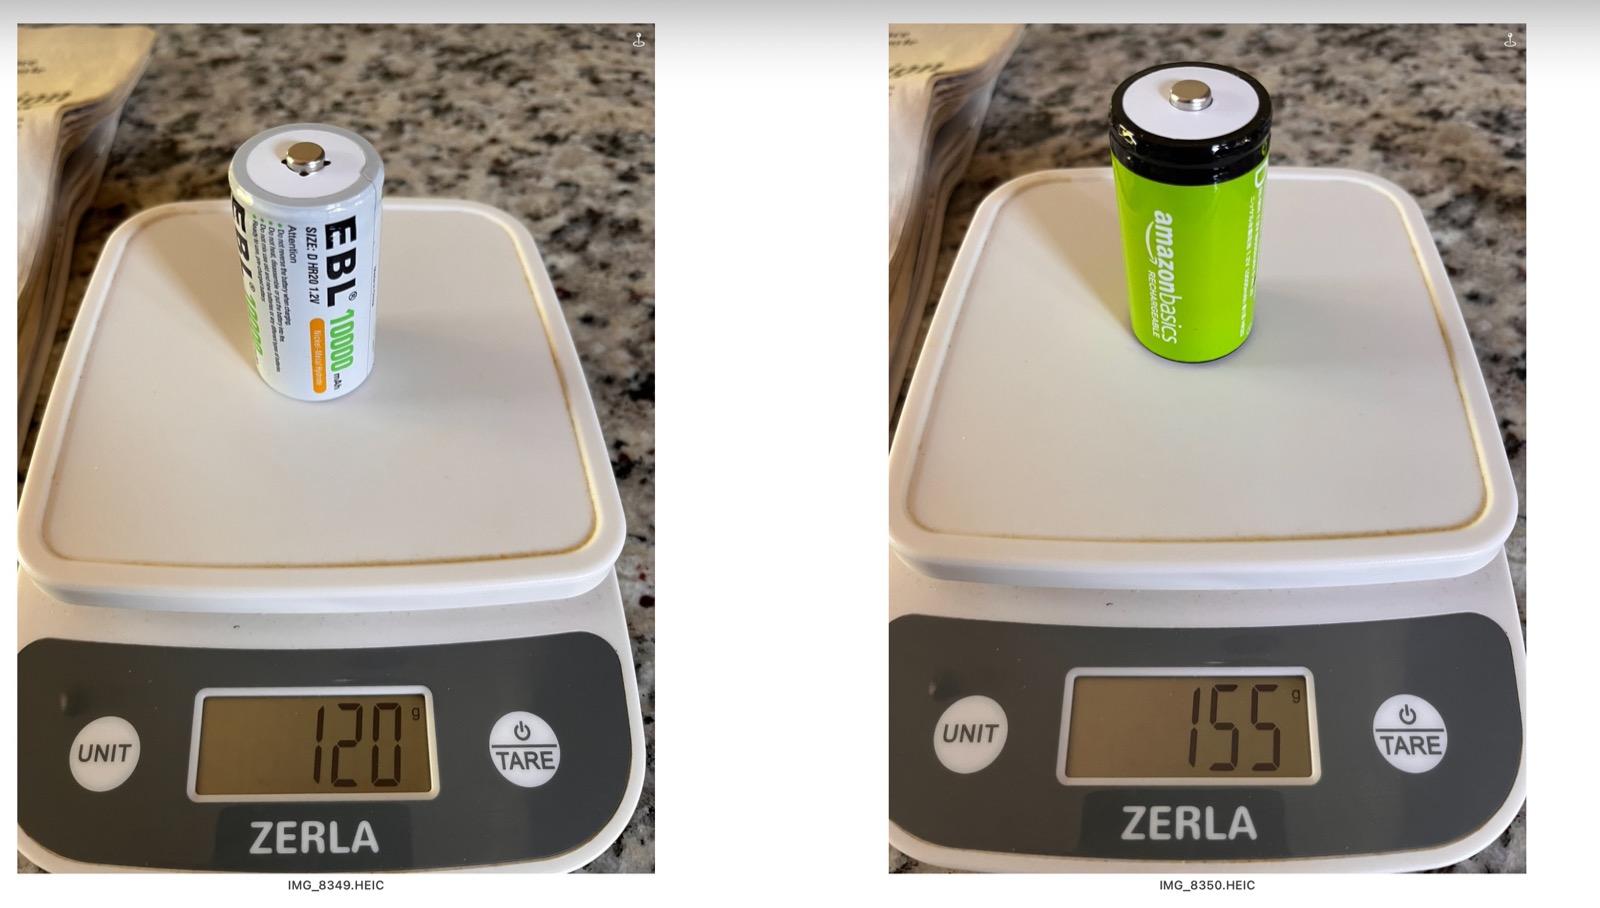 Two images of a D-cell battery on a kitchen scale. EBL weighs 120g, Amazon Basics 155g